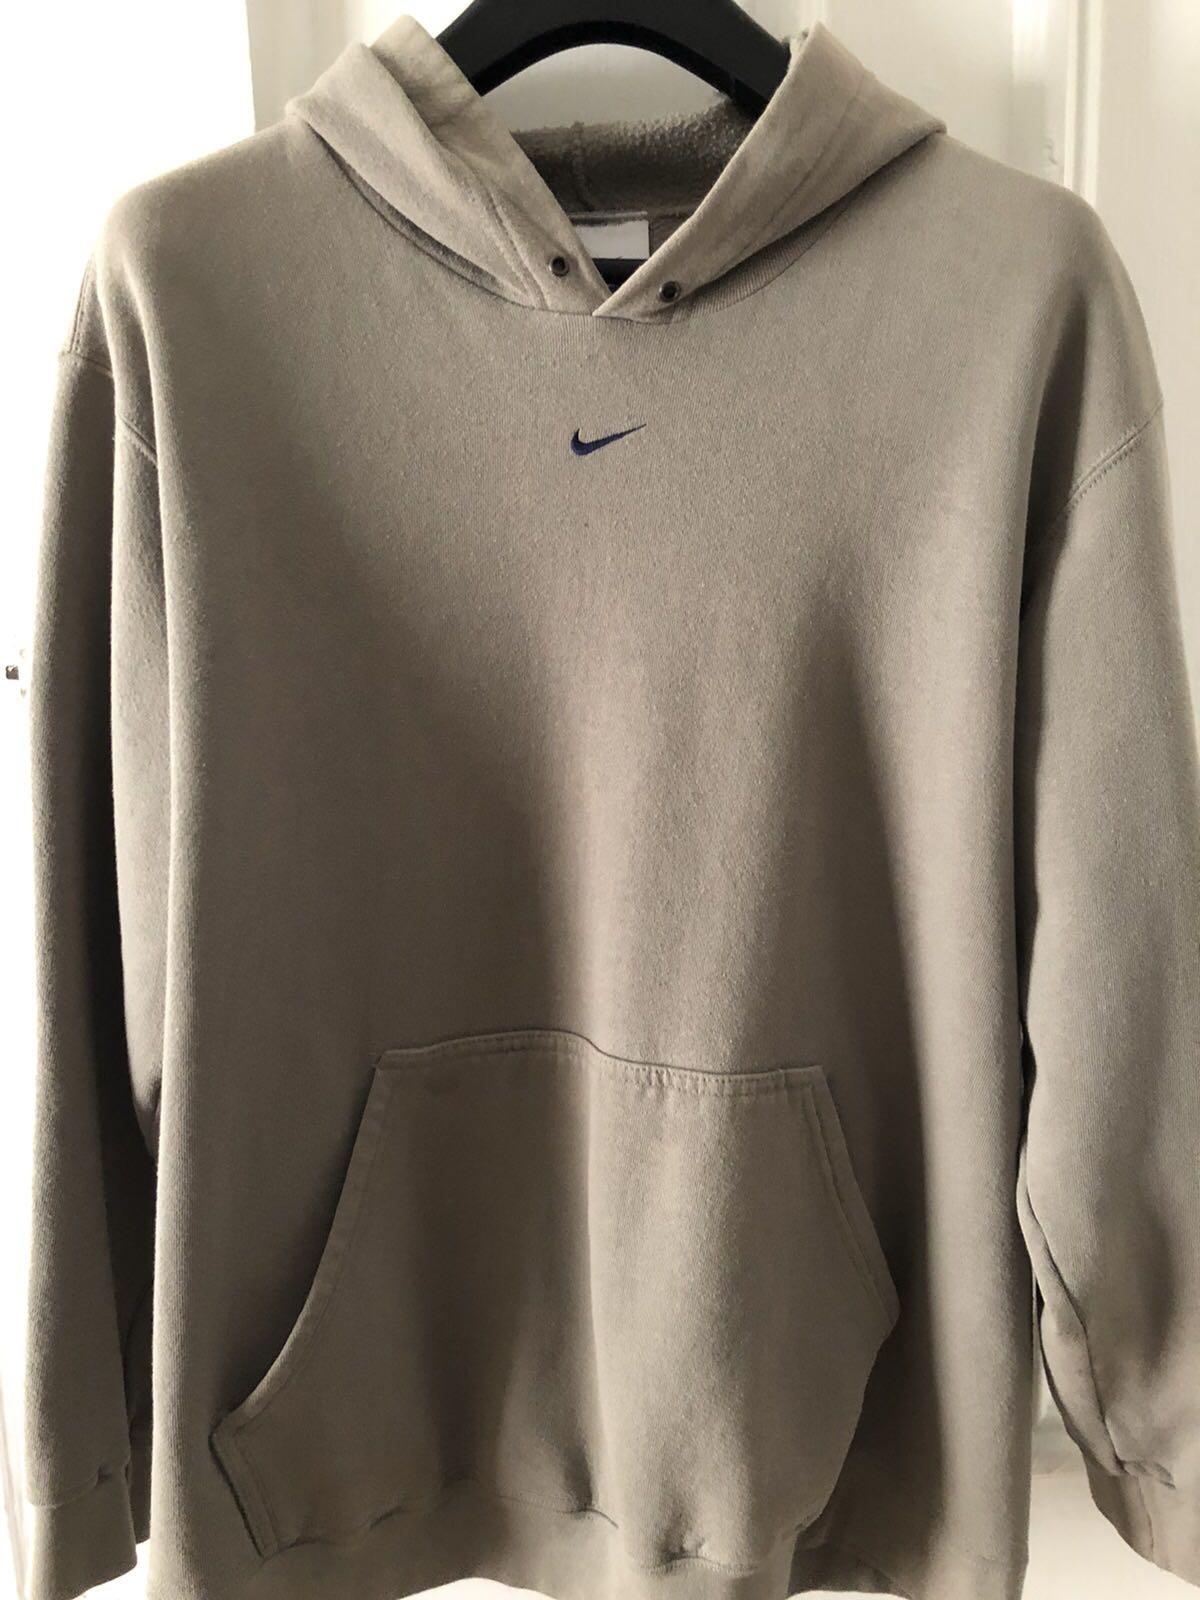 nike sweatshirt with logo in the middle